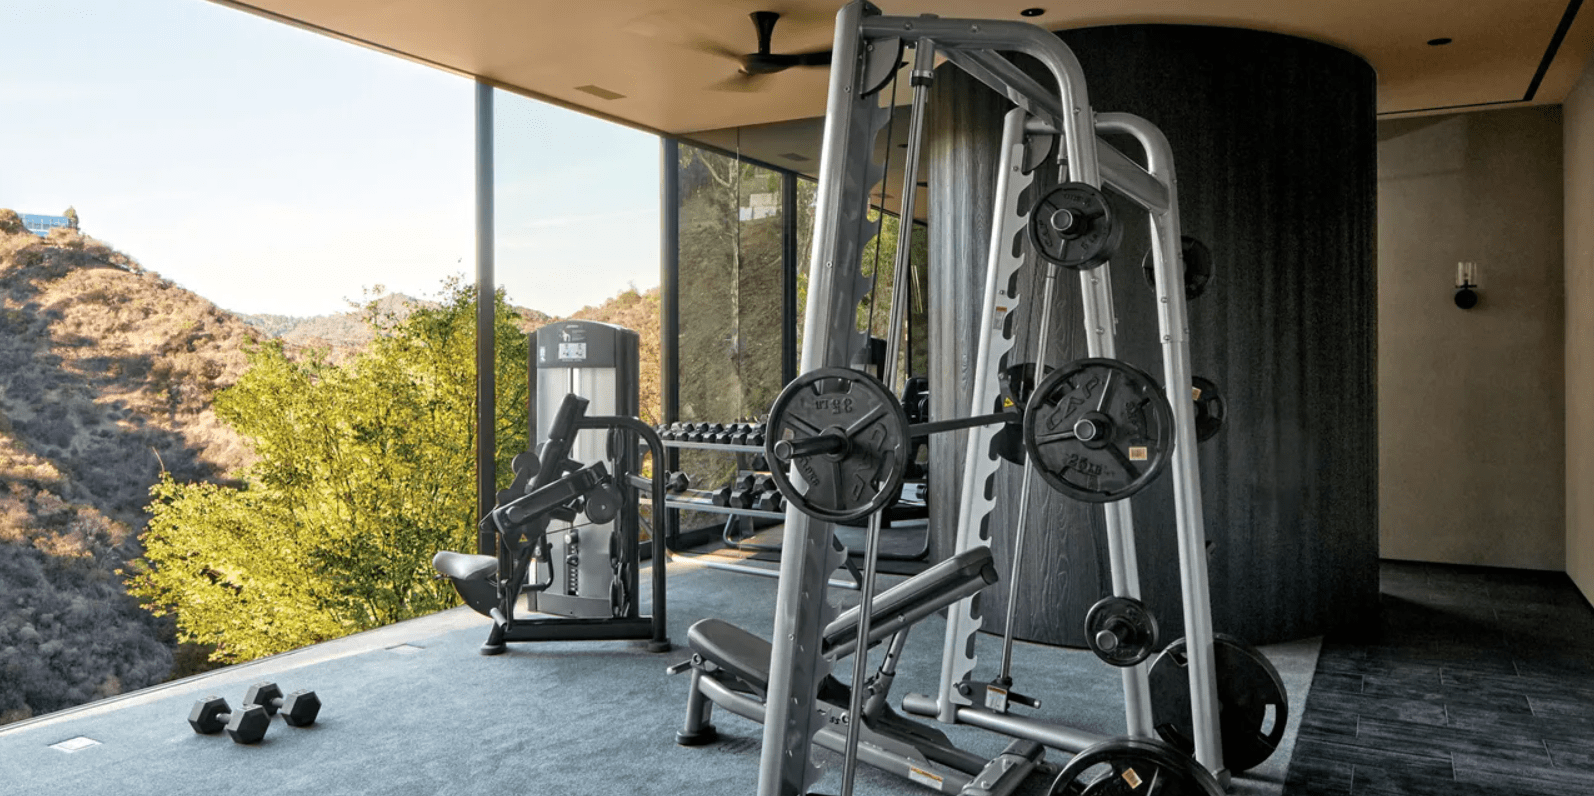 Bring The Gym Into Your Home (Part 1)